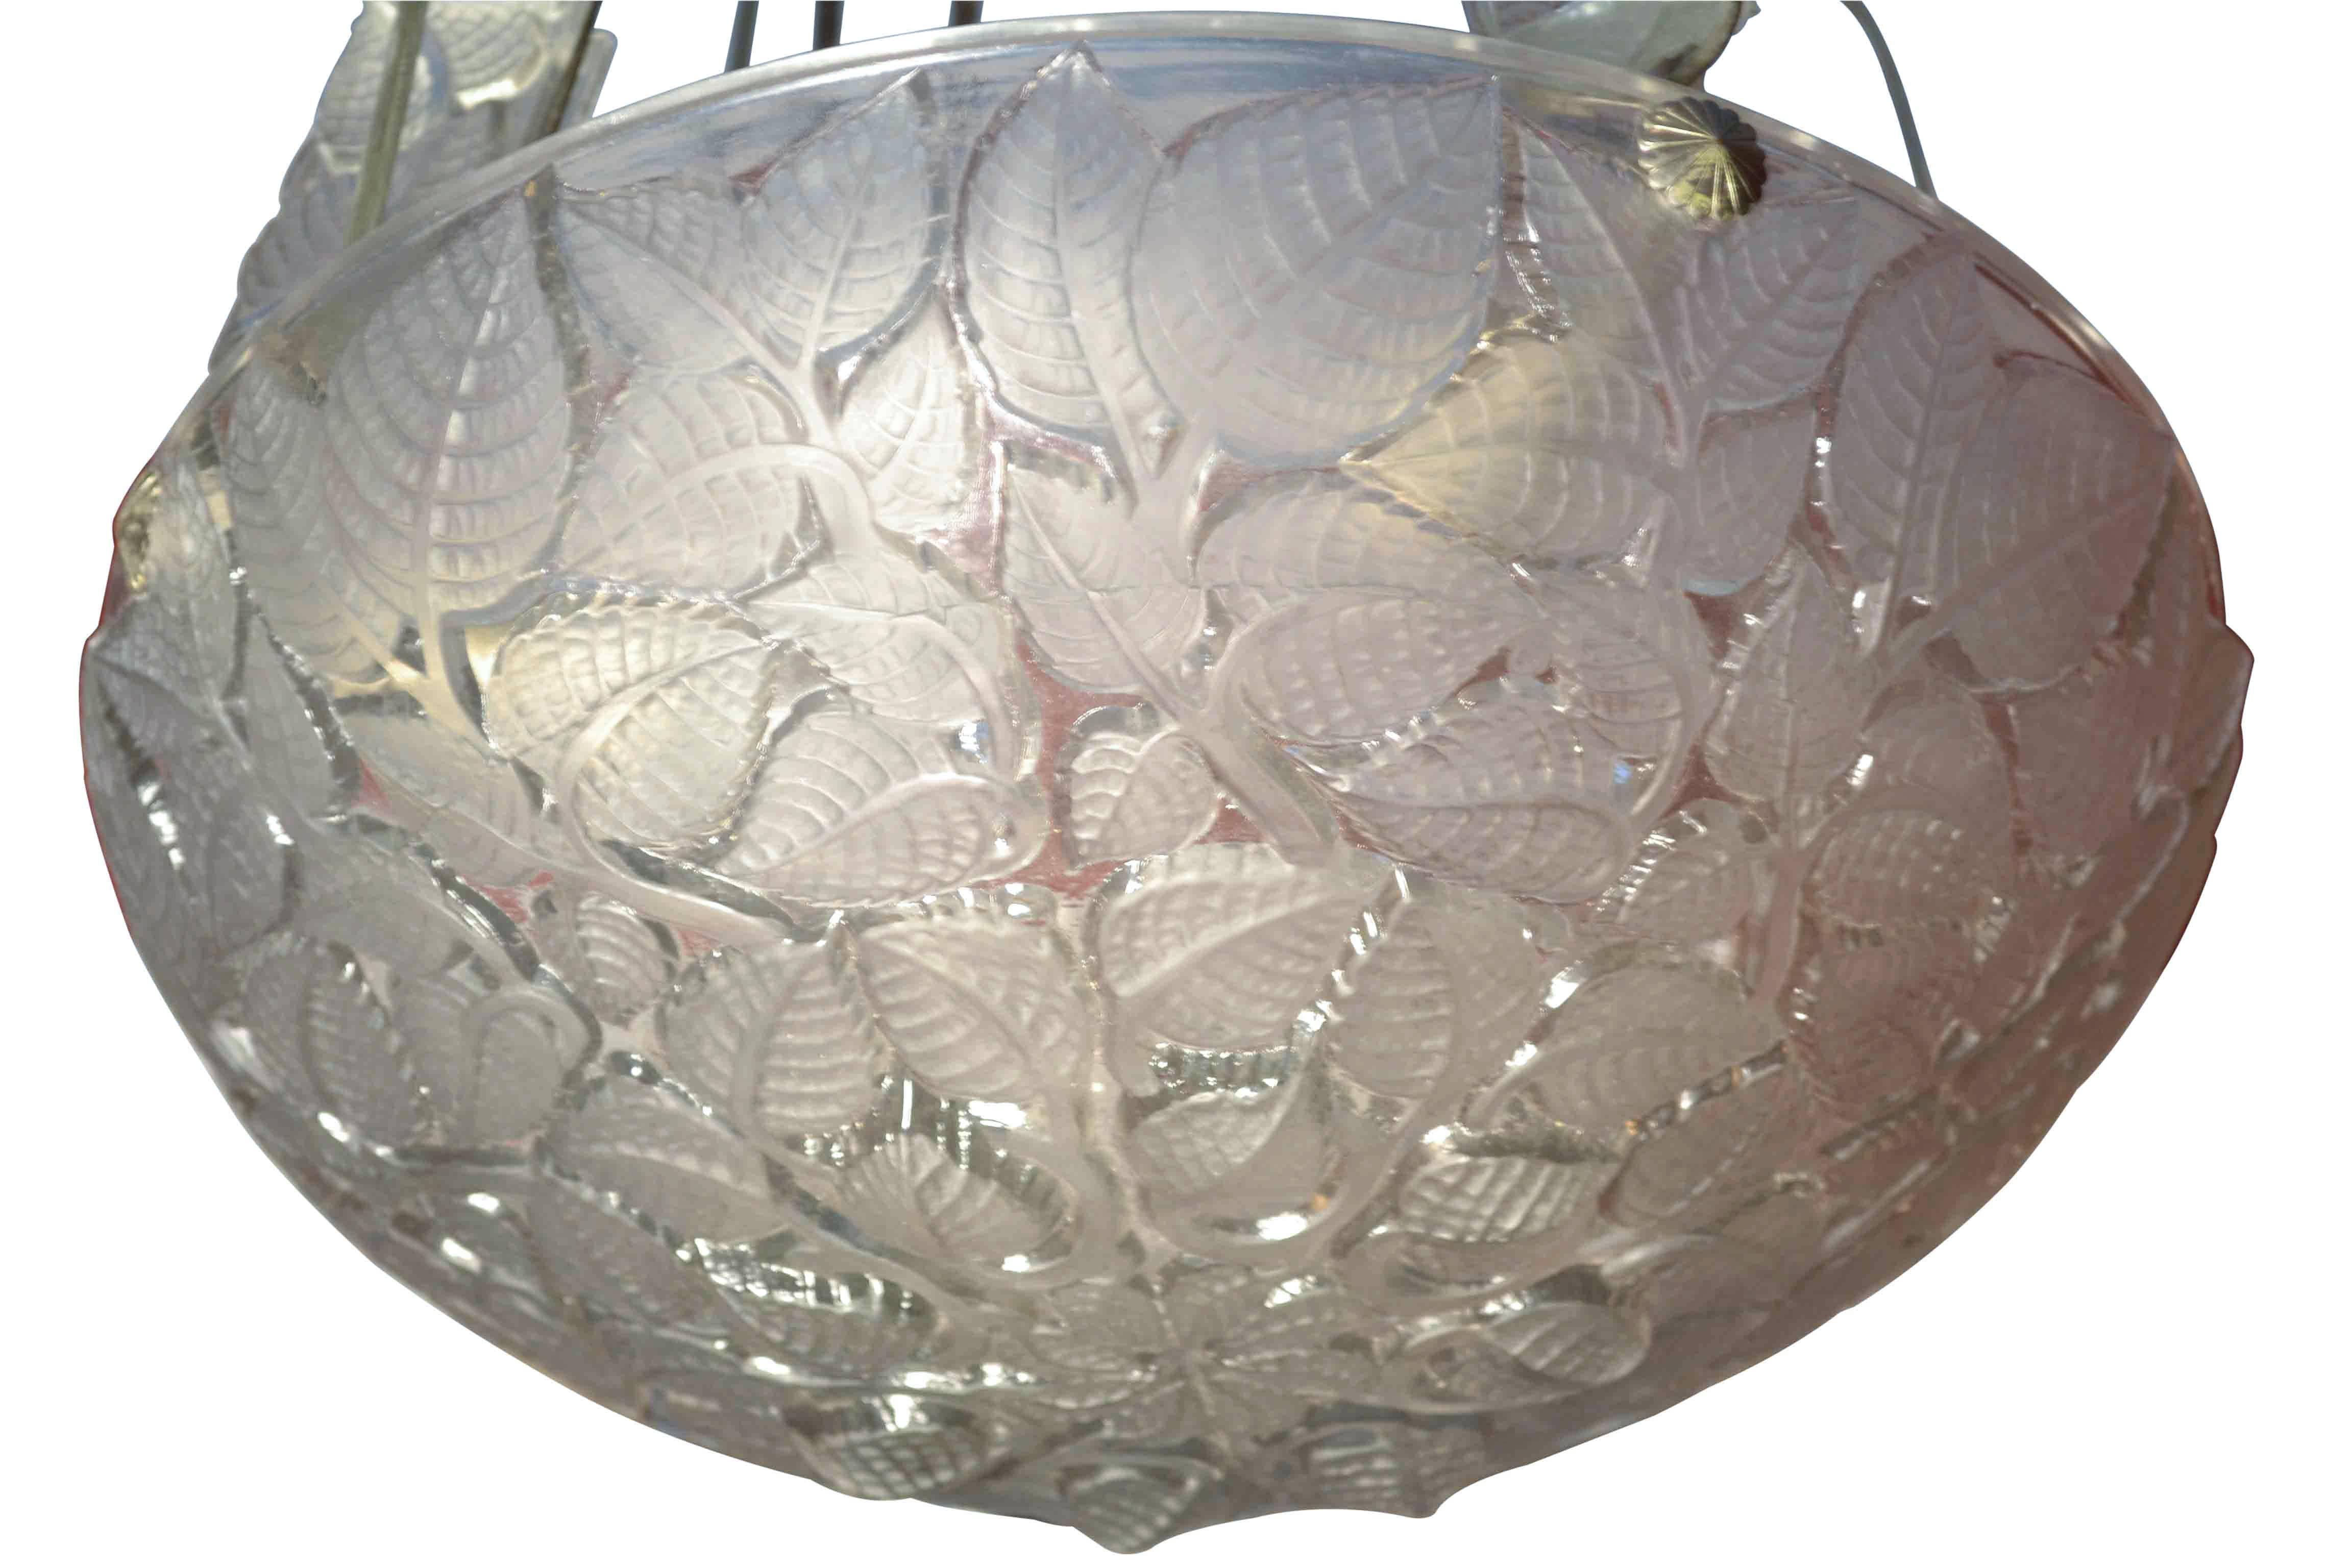 Charmes bowl fixture by René Lalique with frosted leaf pattern on a clear bowl, suspended by four iron links with rectangular glass plaques. Moulded 'R. Lalique' mark, bowl model No. 2458, designed 1924.